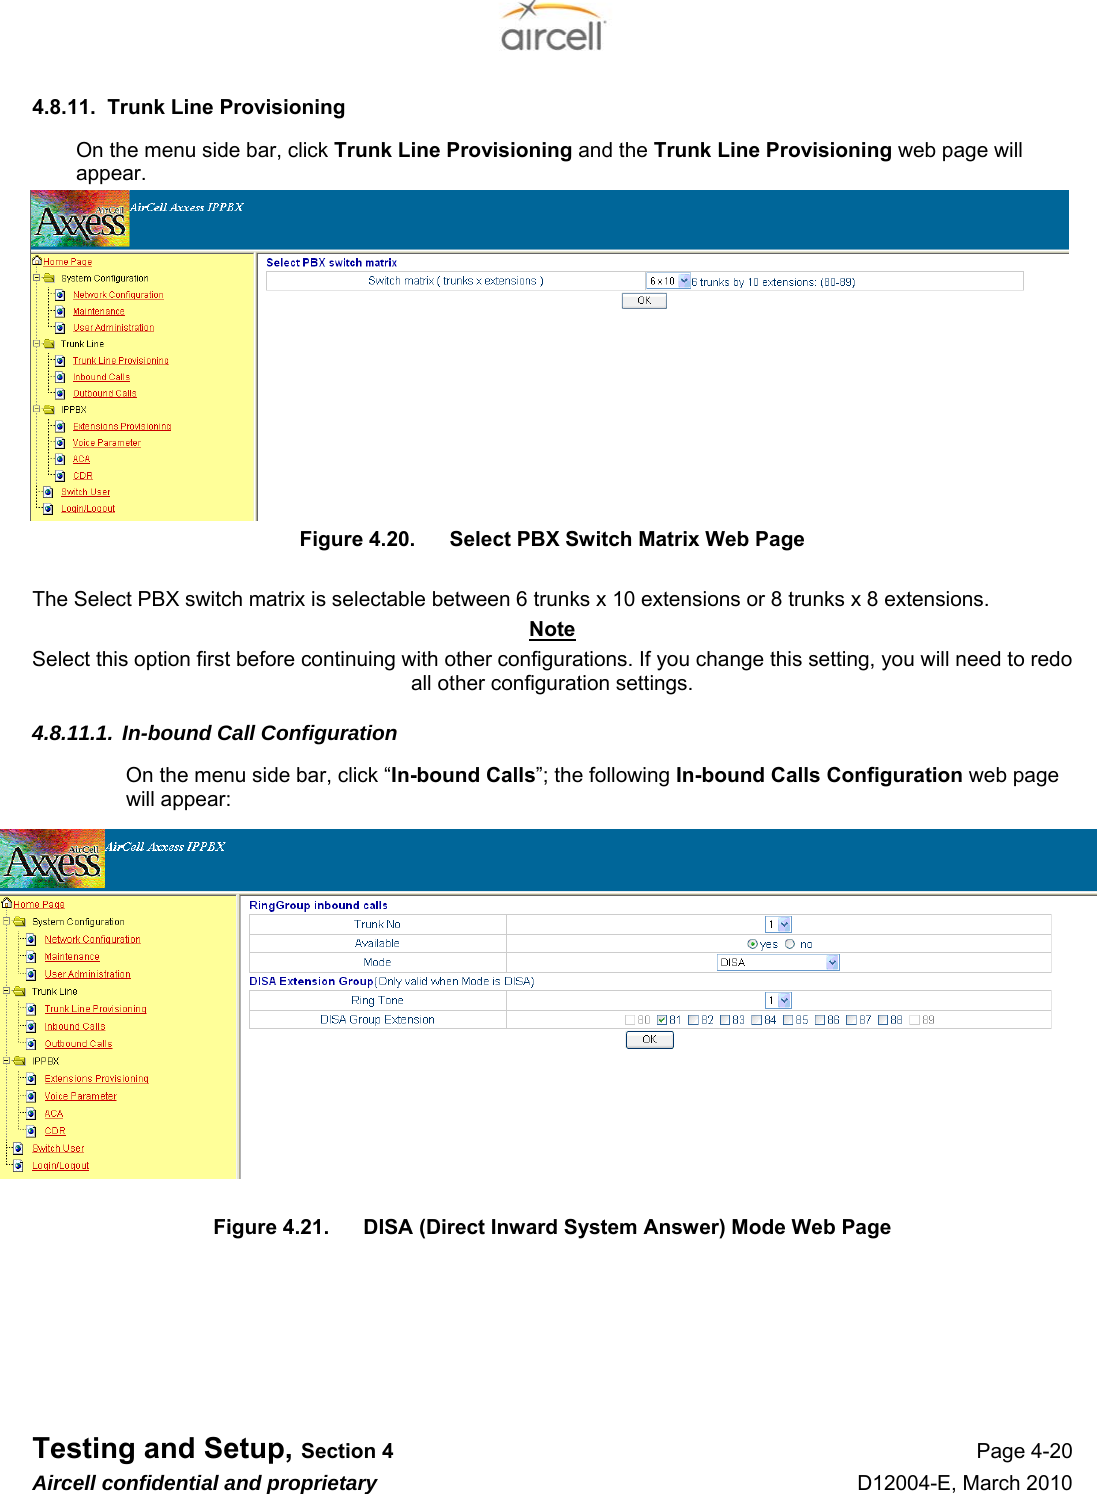  Testing and Setup, Section 4 Page 4-20 Aircell confidential and proprietary D12004-E, March 2010 4.8.11.  Trunk Line Provisioning On the menu side bar, click Trunk Line Provisioning and the Trunk Line Provisioning web page will appear. Figure 4.20.  Select PBX Switch Matrix Web Page  The Select PBX switch matrix is selectable between 6 trunks x 10 extensions or 8 trunks x 8 extensions. Note Select this option first before continuing with other configurations. If you change this setting, you will need to redo all other configuration settings. 4.8.11.1. In-bound Call Configuration On the menu side bar, click “In-bound Calls”; the following In-bound Calls Configuration web page will appear:  Figure 4.21.  DISA (Direct Inward System Answer) Mode Web Page      